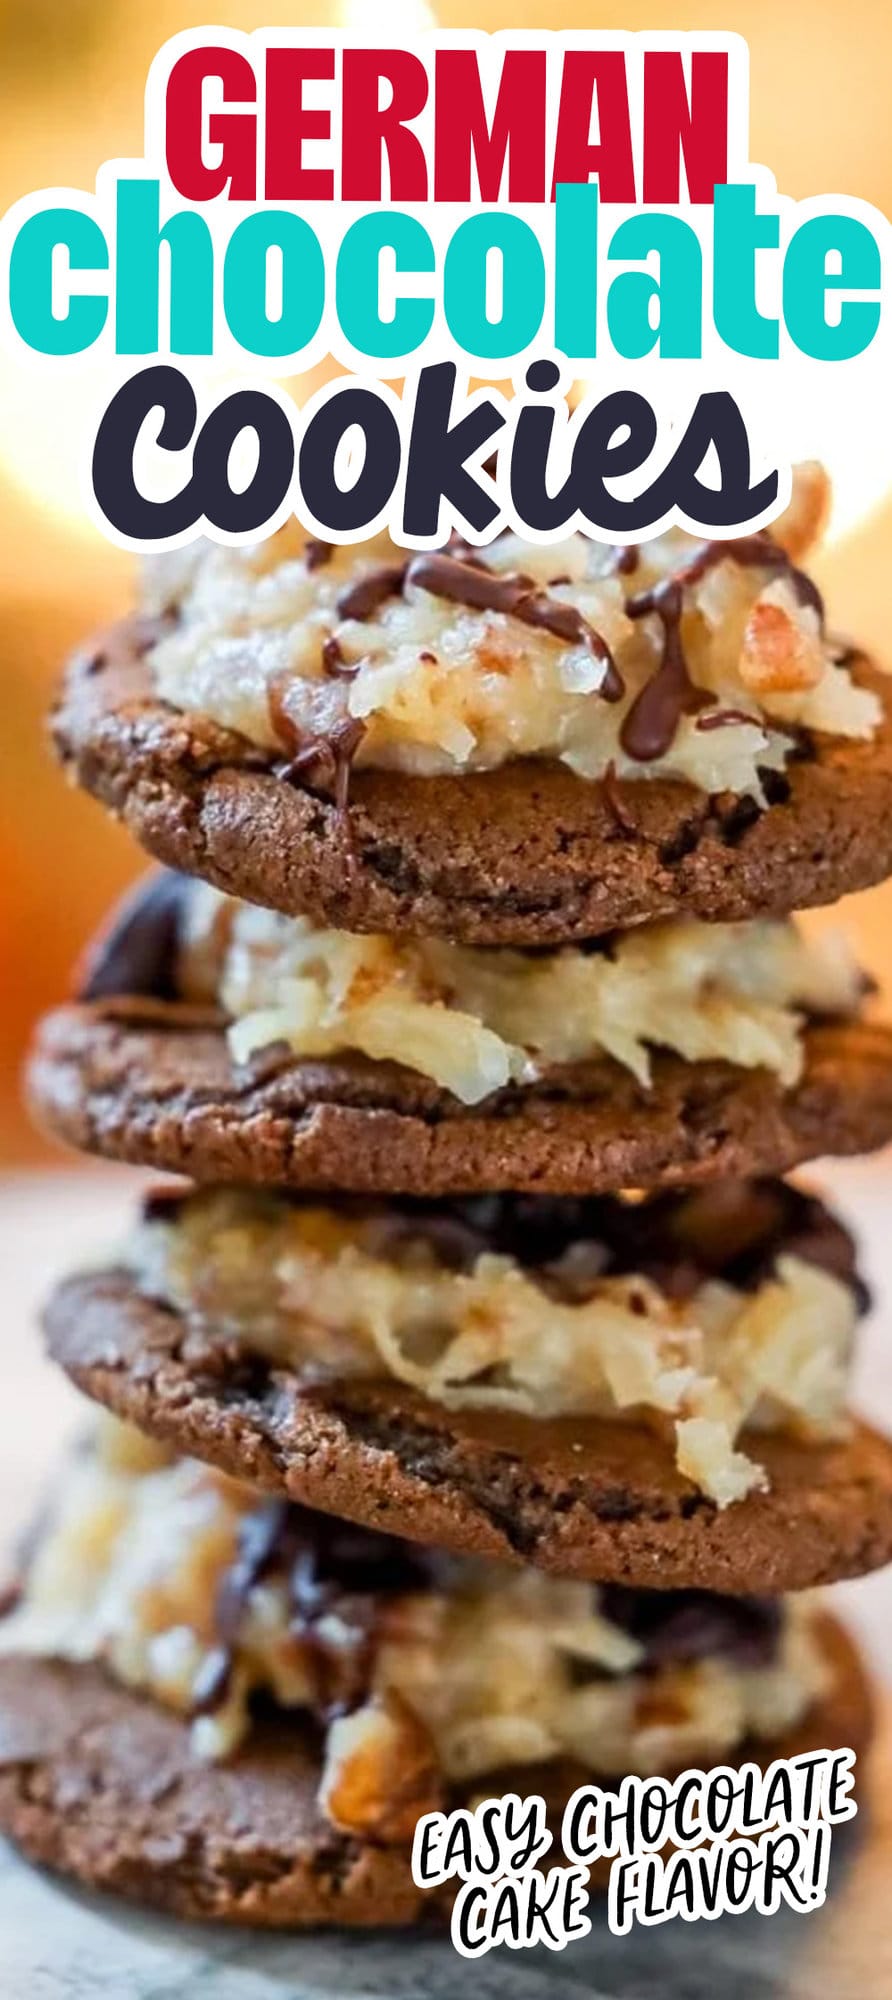 Chocolate cookie topped with coconut and chocolate German topping